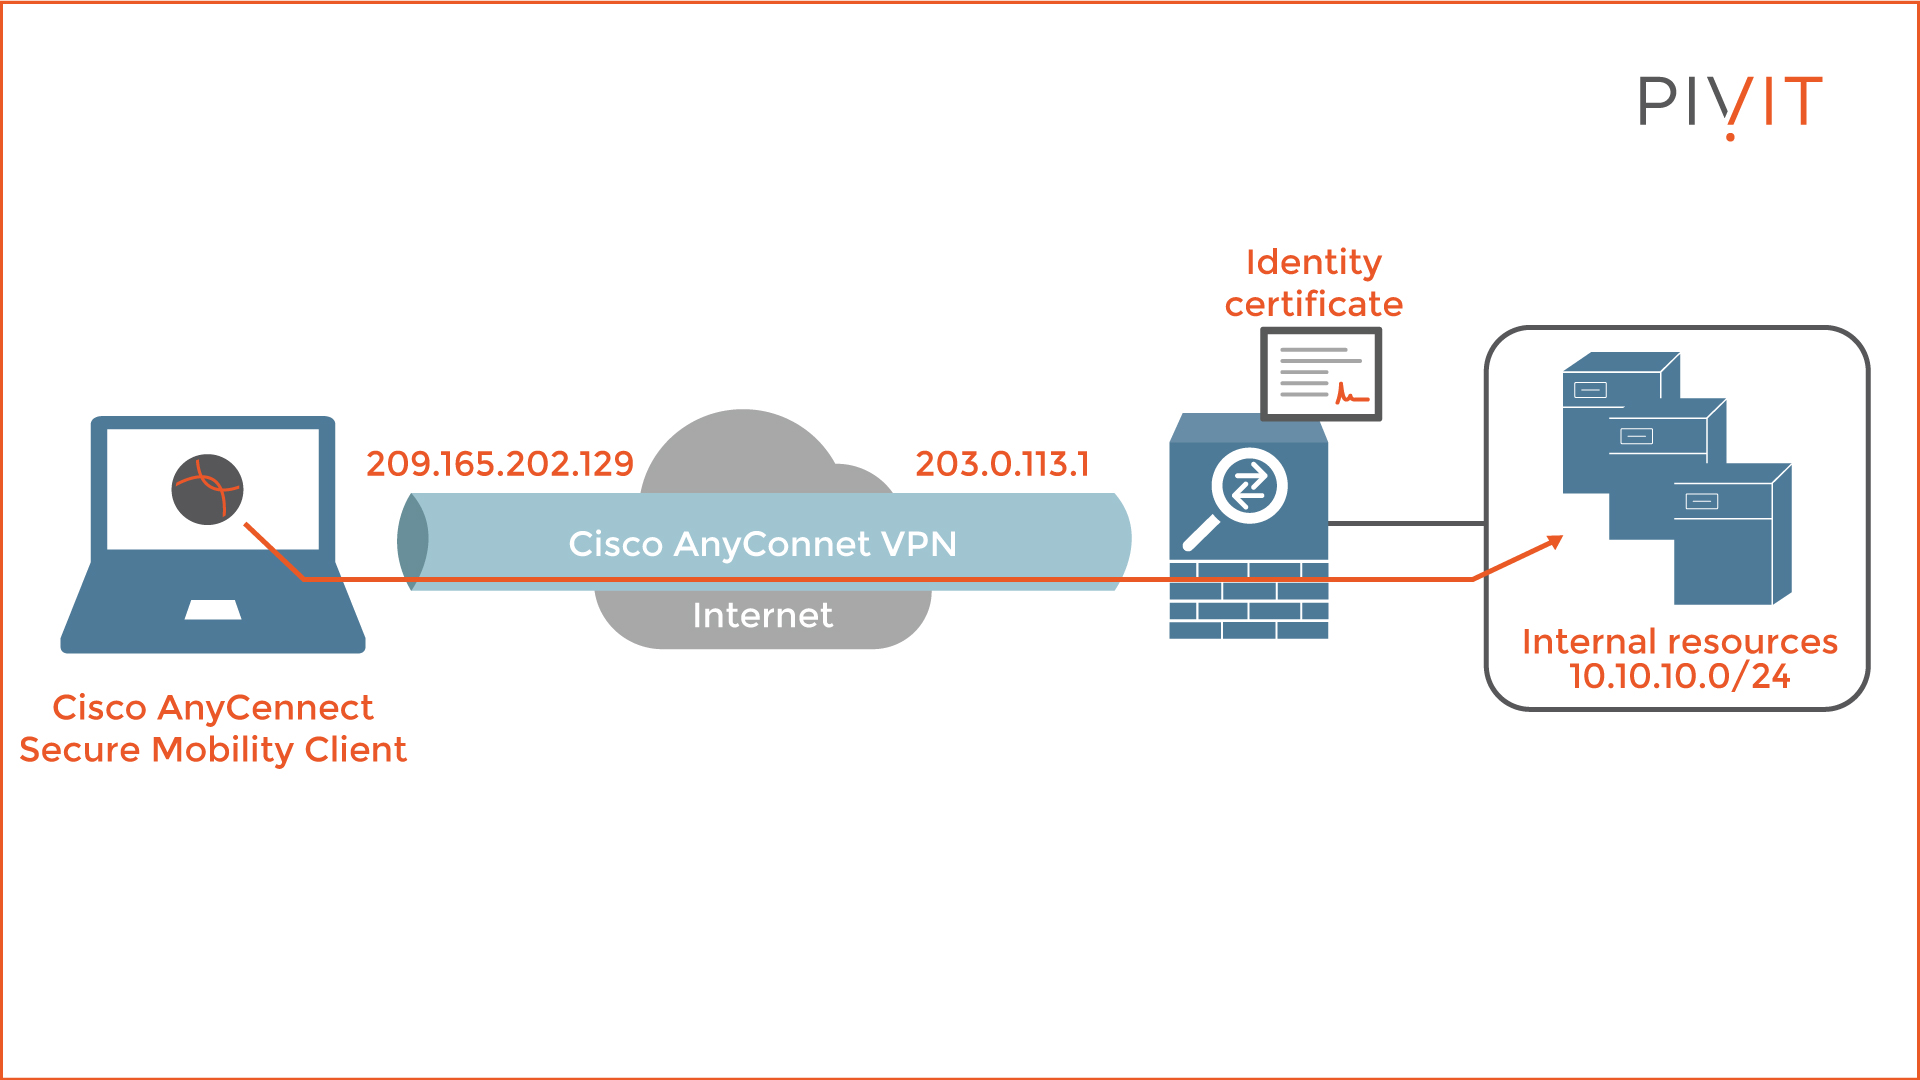 A remote user with the Cisco AnyConnect client creates a VPN connection to Cisco ASA to access internal resources behind the firewall